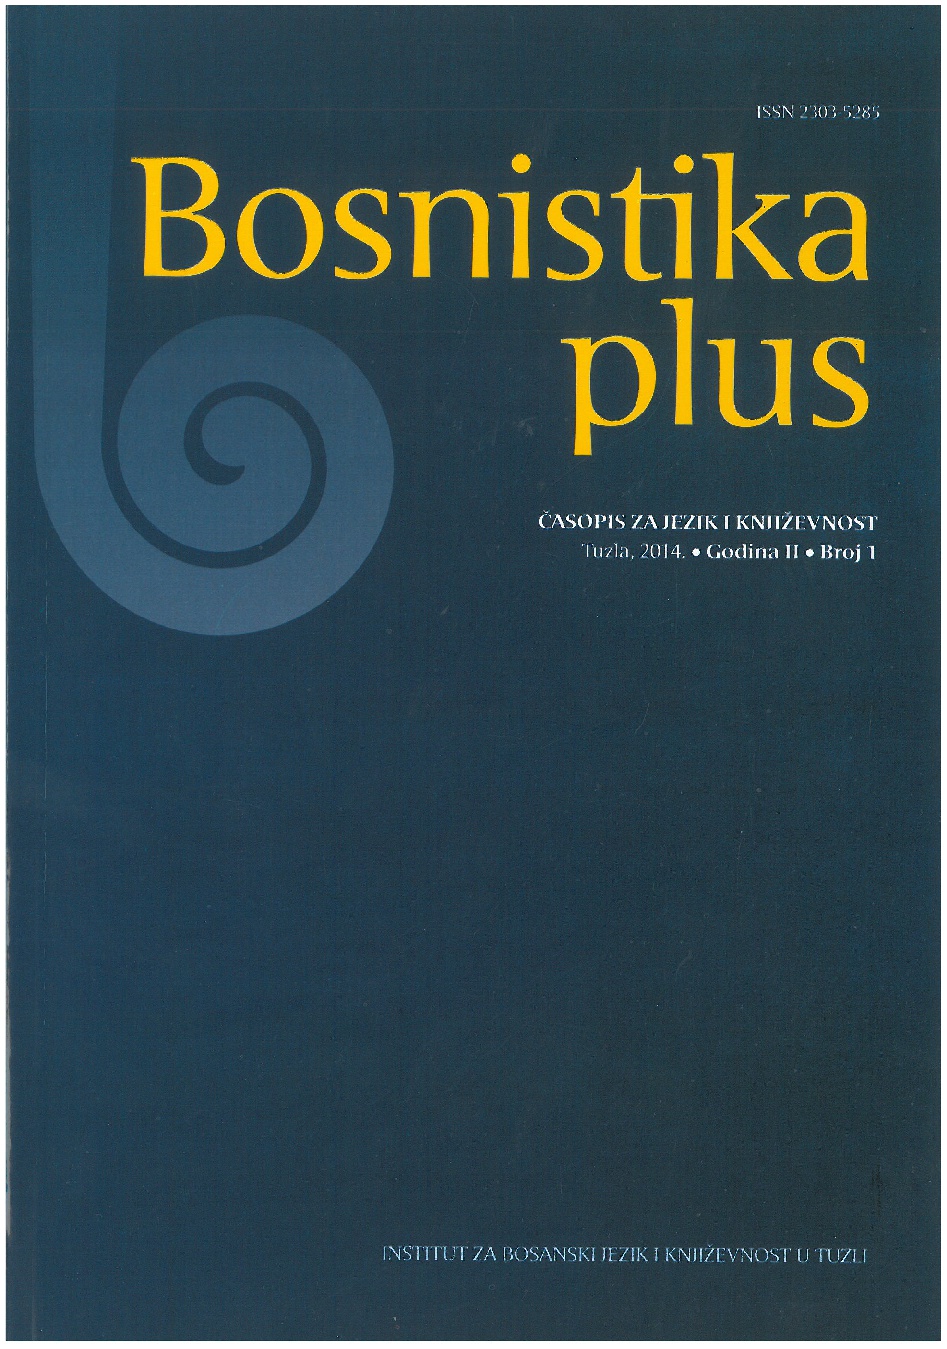 I Compose Prayers in a Verse (One Poem of M. Ć. Ćatić and One Poem of T. Ujević) Cover Image